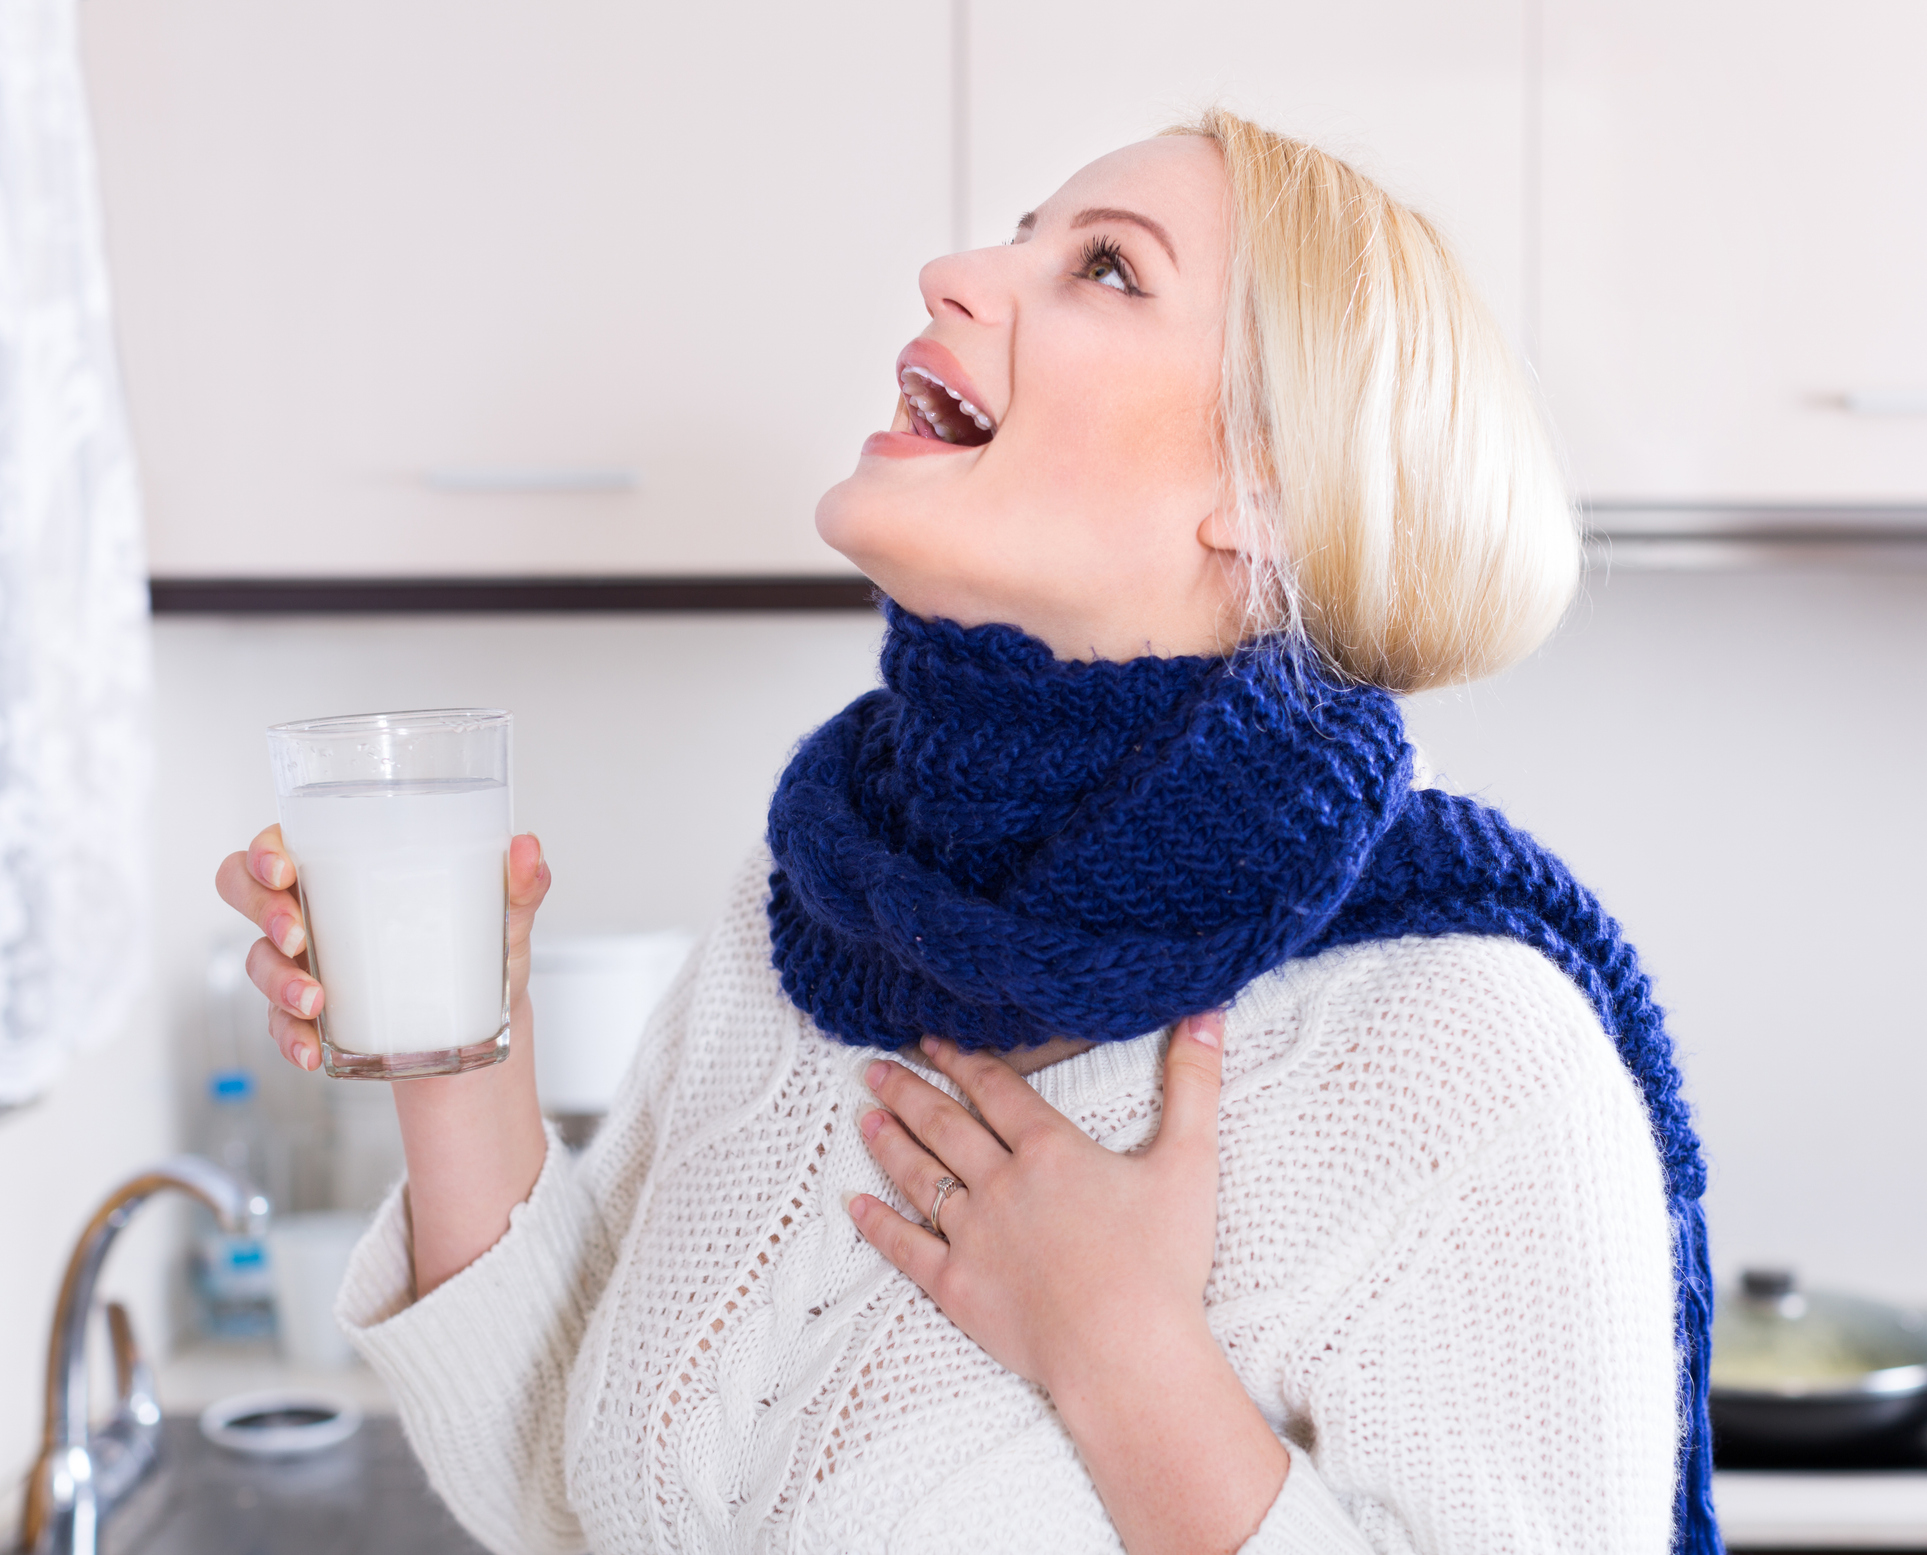 An image of a young woman gargling with salt water to relieve a sore throat